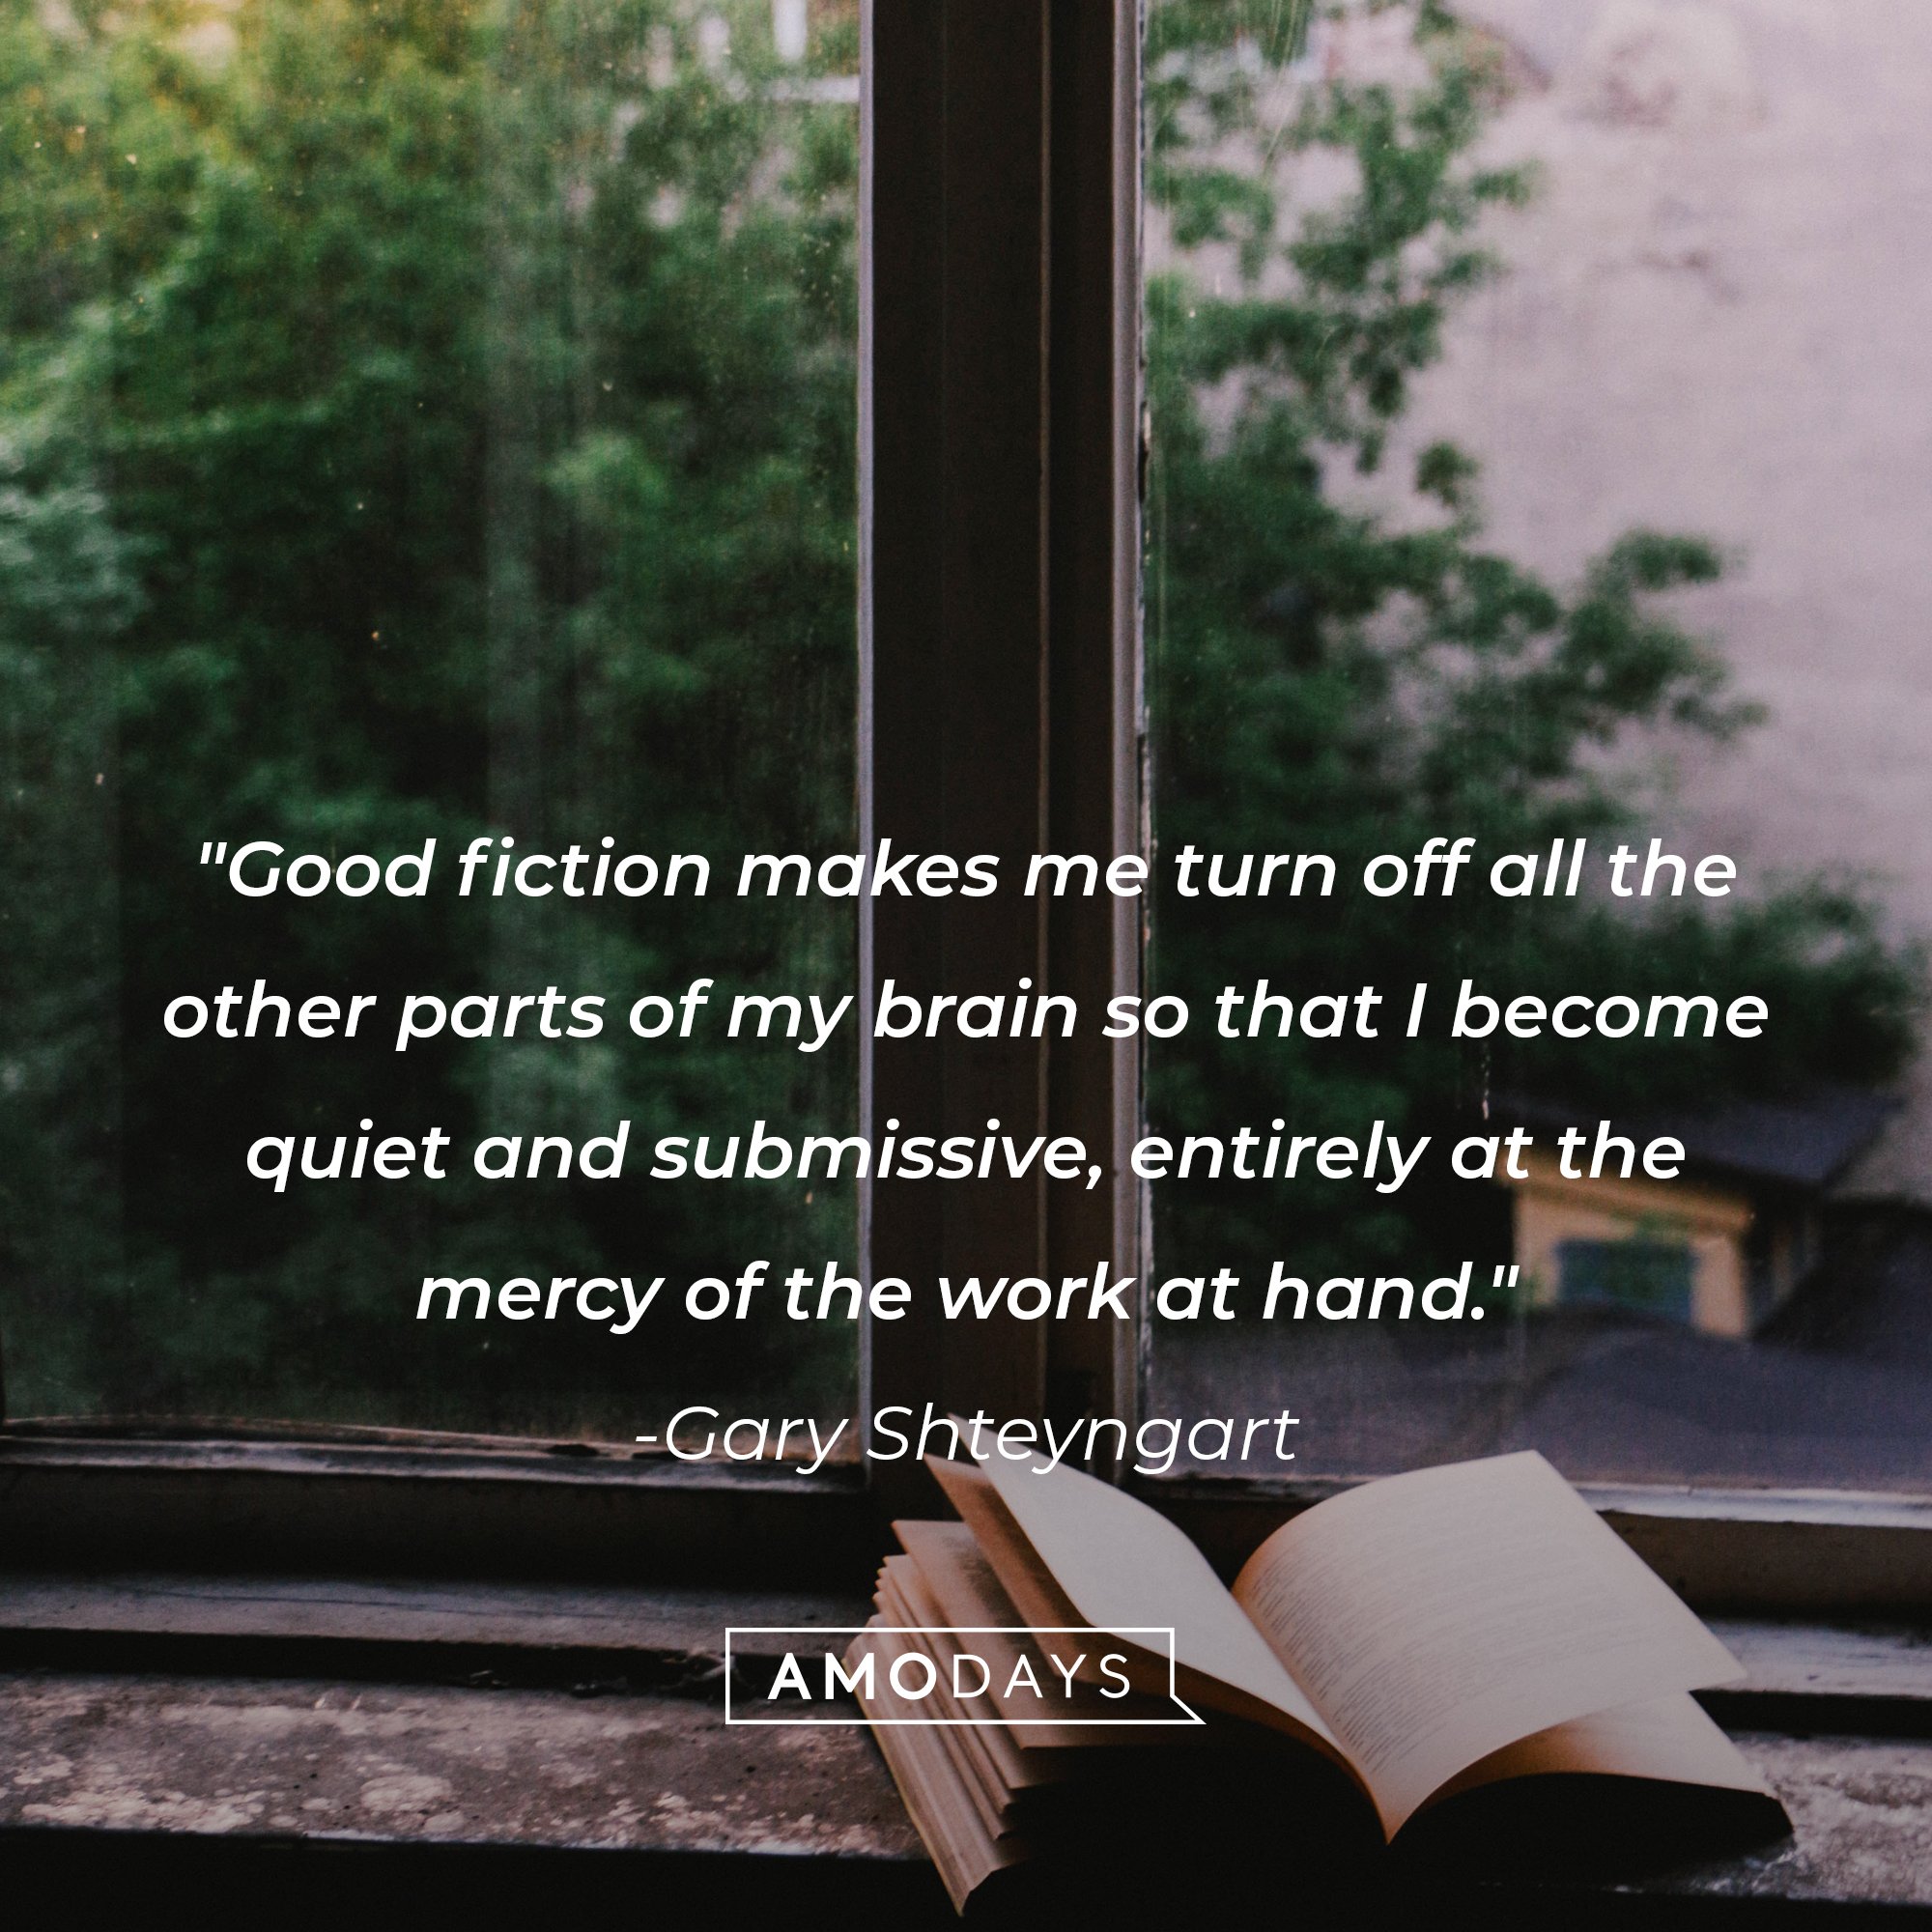  Gary Shteyngart’s quote: "Good fiction makes me turn off all the other parts of my brain so that I become quiet and submissive, entirely at the mercy of the work at hand." | Image: AmoDays 